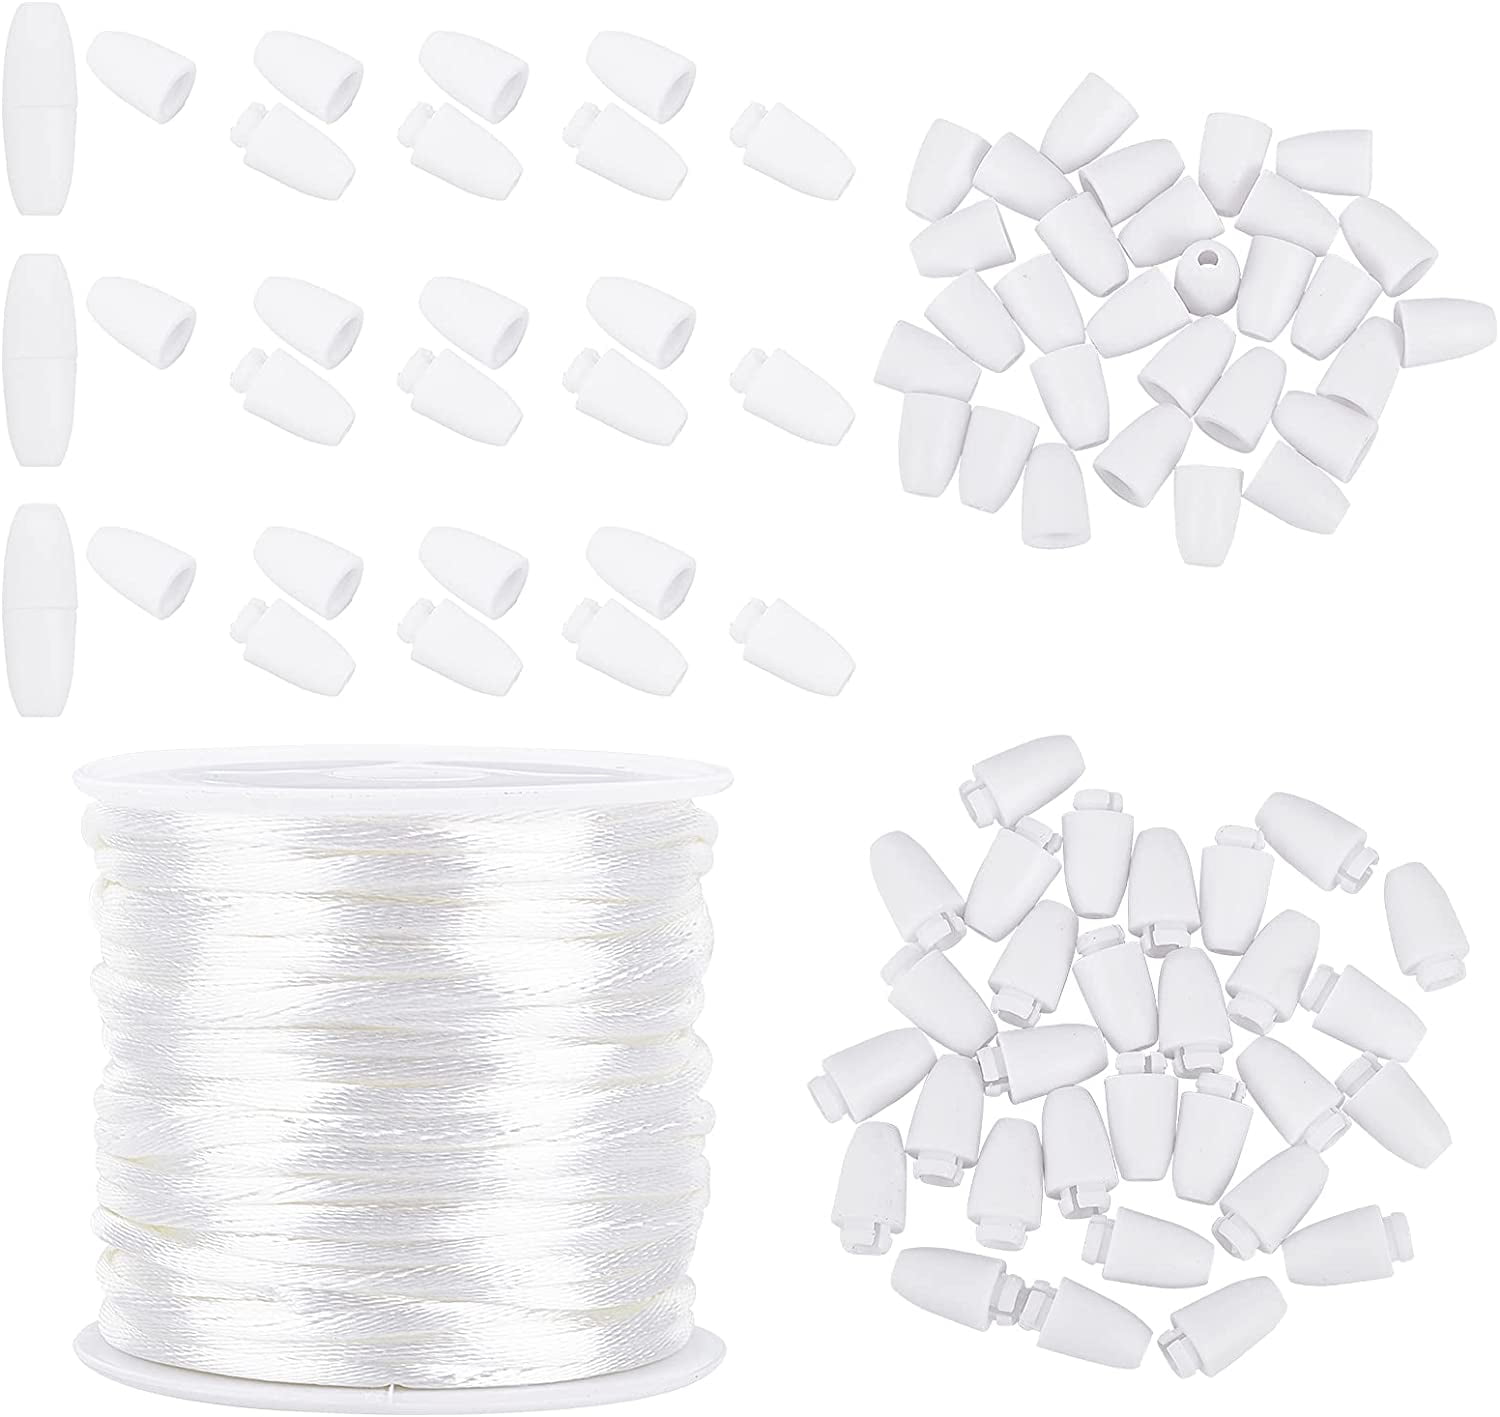 30 Set 24mm Plastic Break Away Safety Clasp Buckle with 10m Nylon Braided  String Cords for Bracelets Necklaces DIY Jewelry Craft Making White 